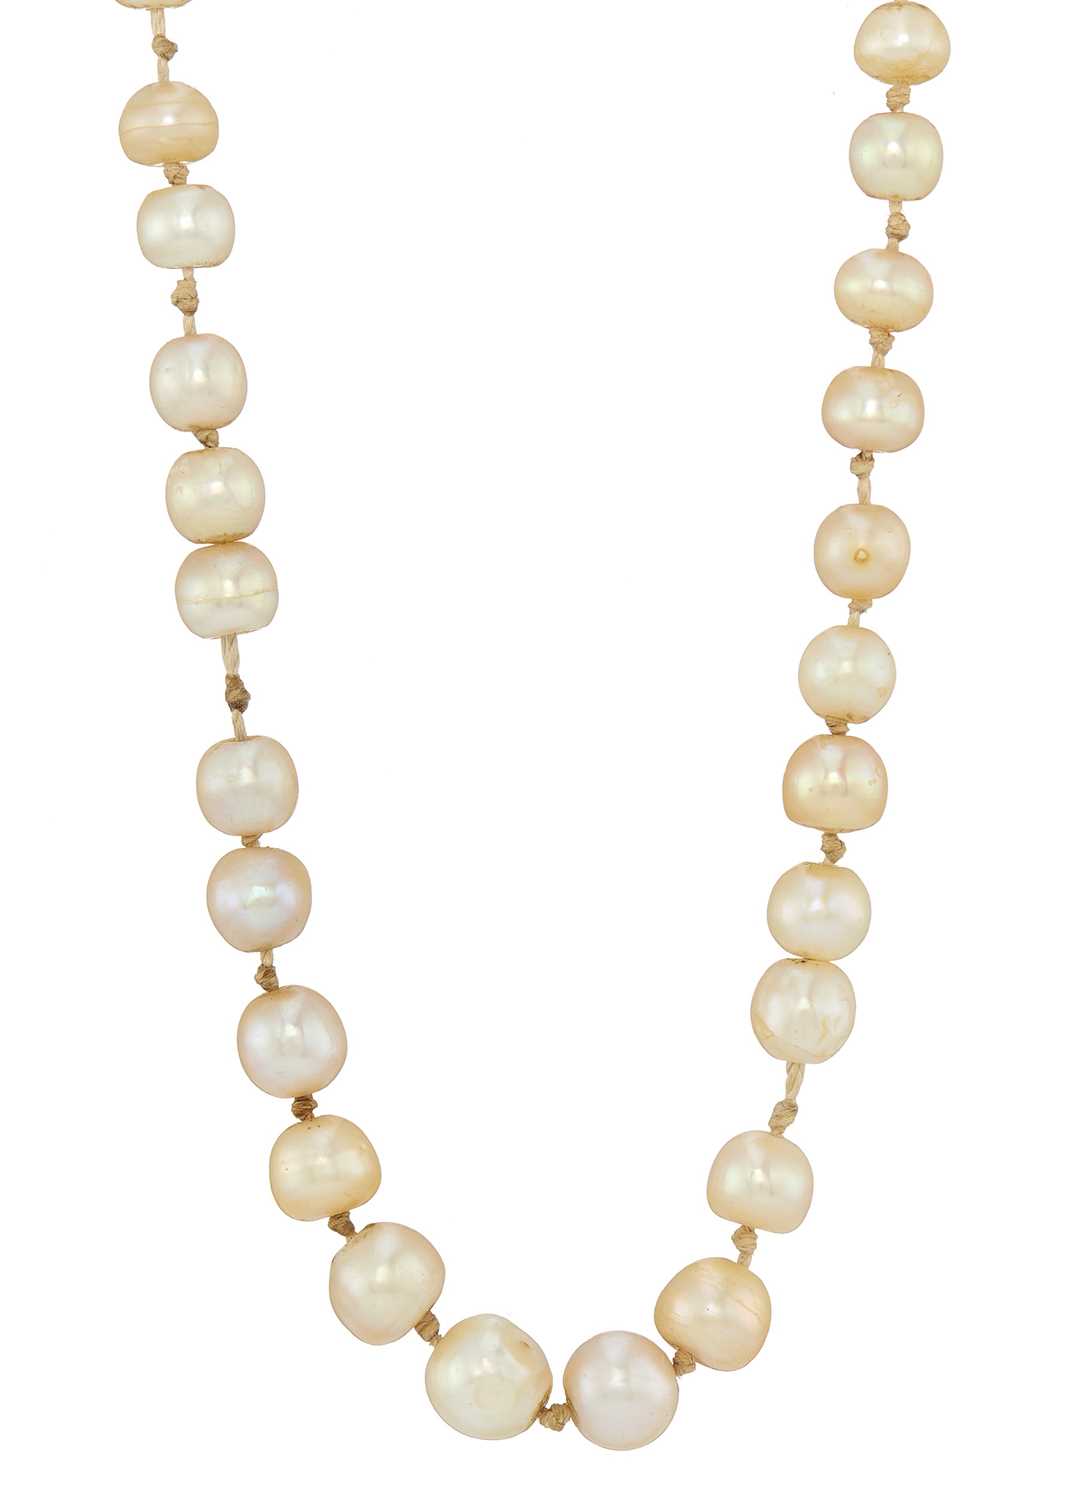 Lot 4 - An early 20th century pearl necklace, with platinum diamond clasp